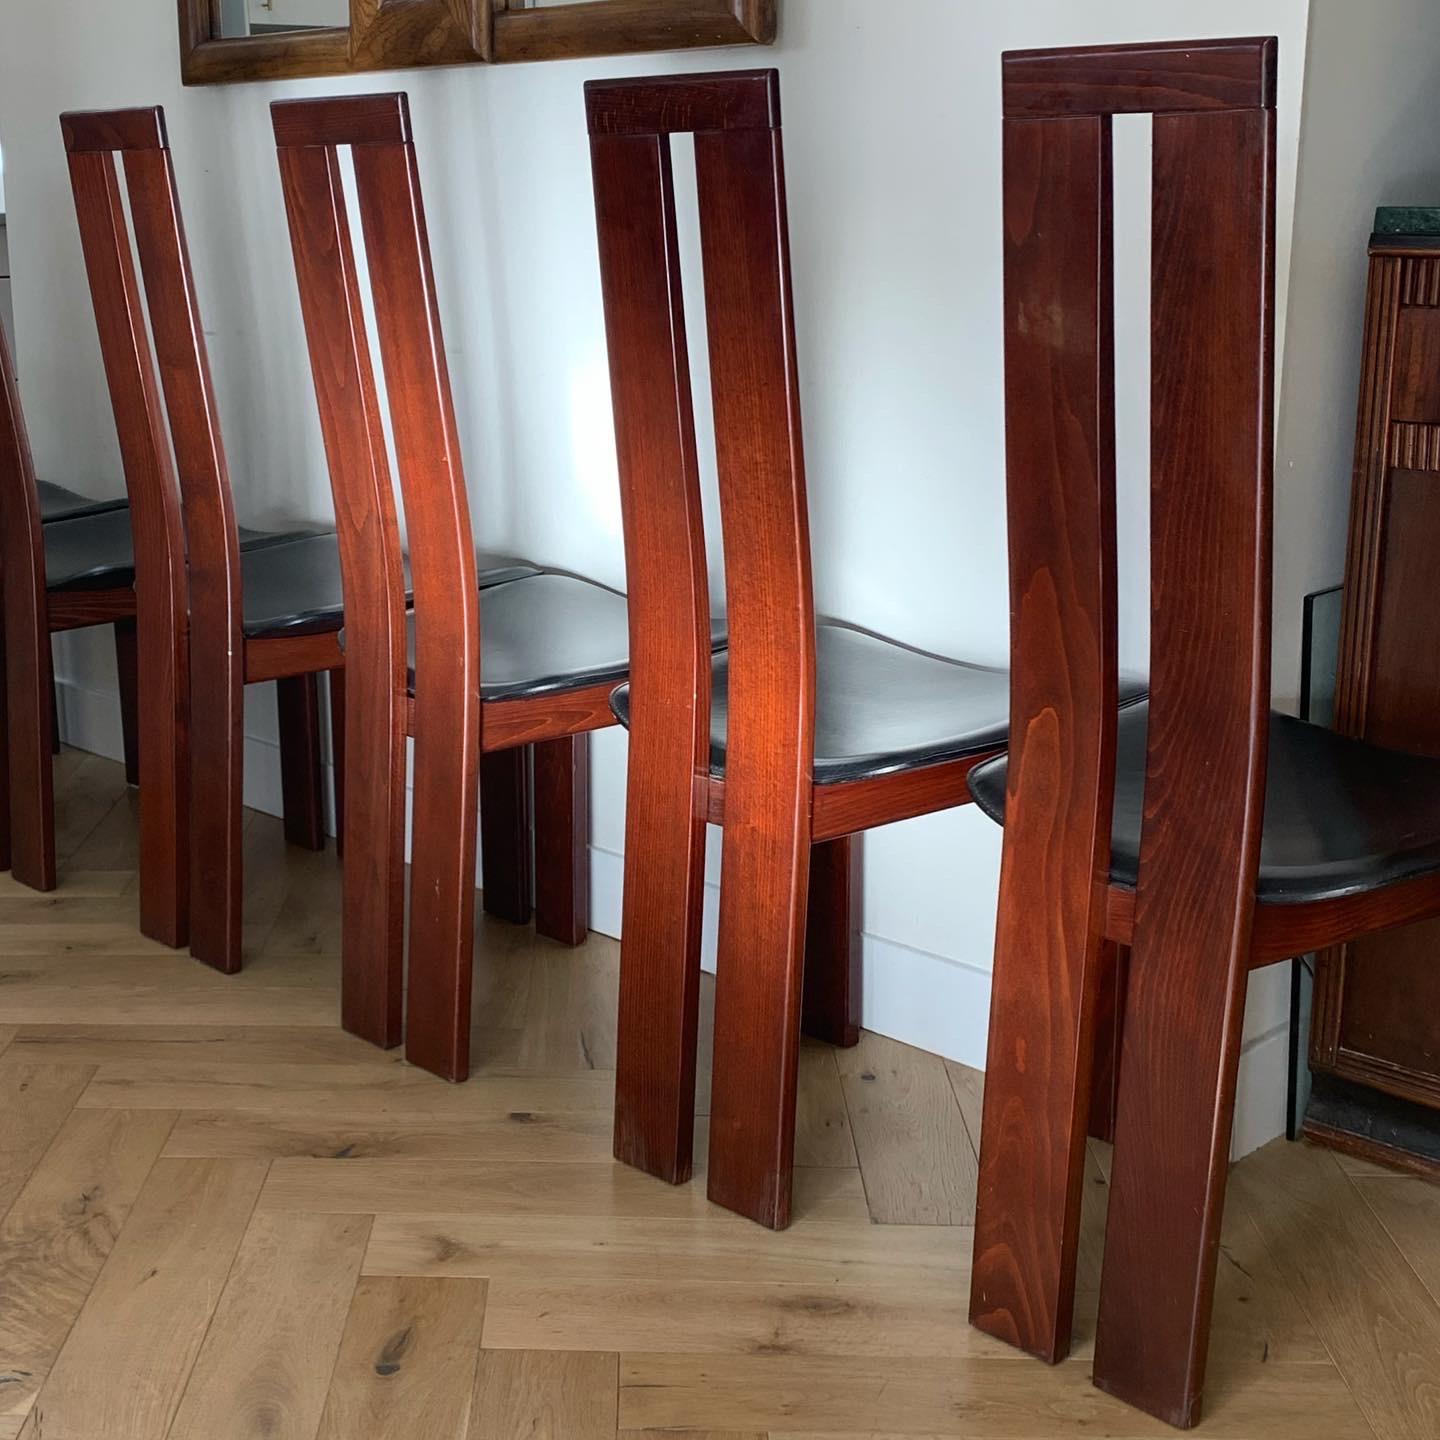 A fabulous set of 6 postmodern dining chairs by Pietro Costantini for Ello Furniture, at once elegant and eccentric. Made in Italy circa mid-1970s. Chairs are a rich cherry wood with original black leather upholstery, and feature the iconic